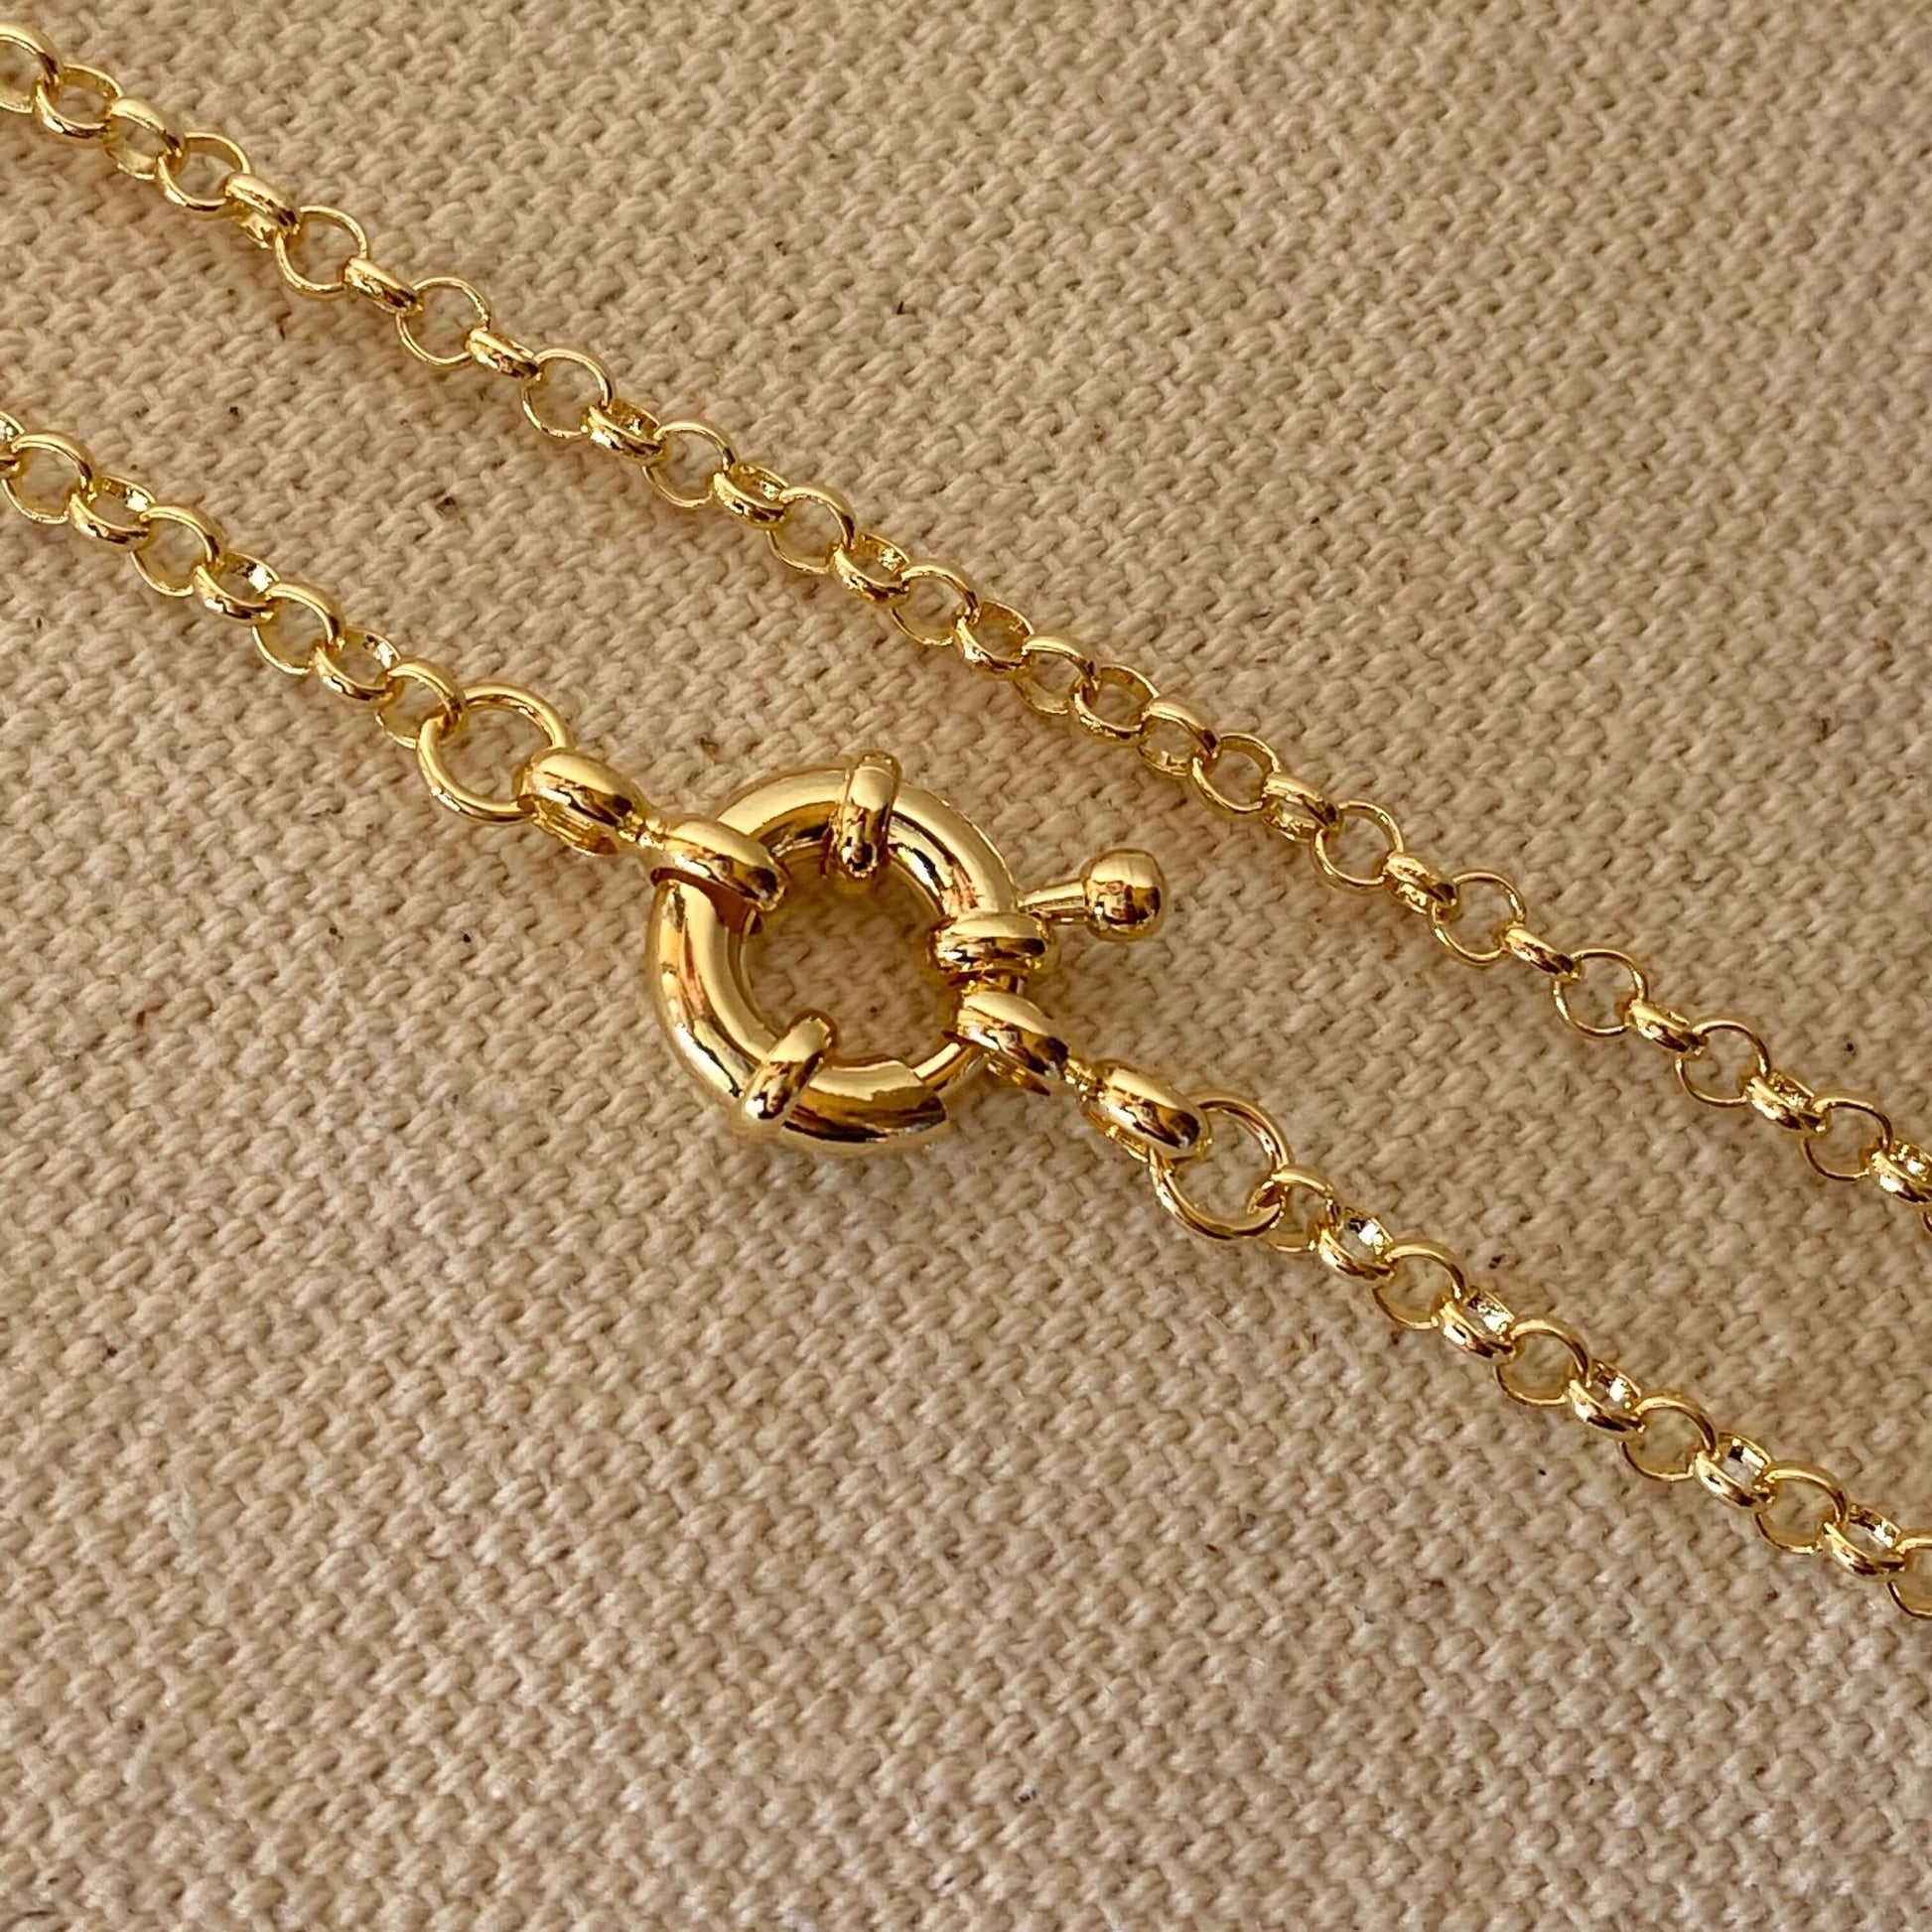 GoldFi 18k Gold Filled Front Clasp Rolo Chain Necklace